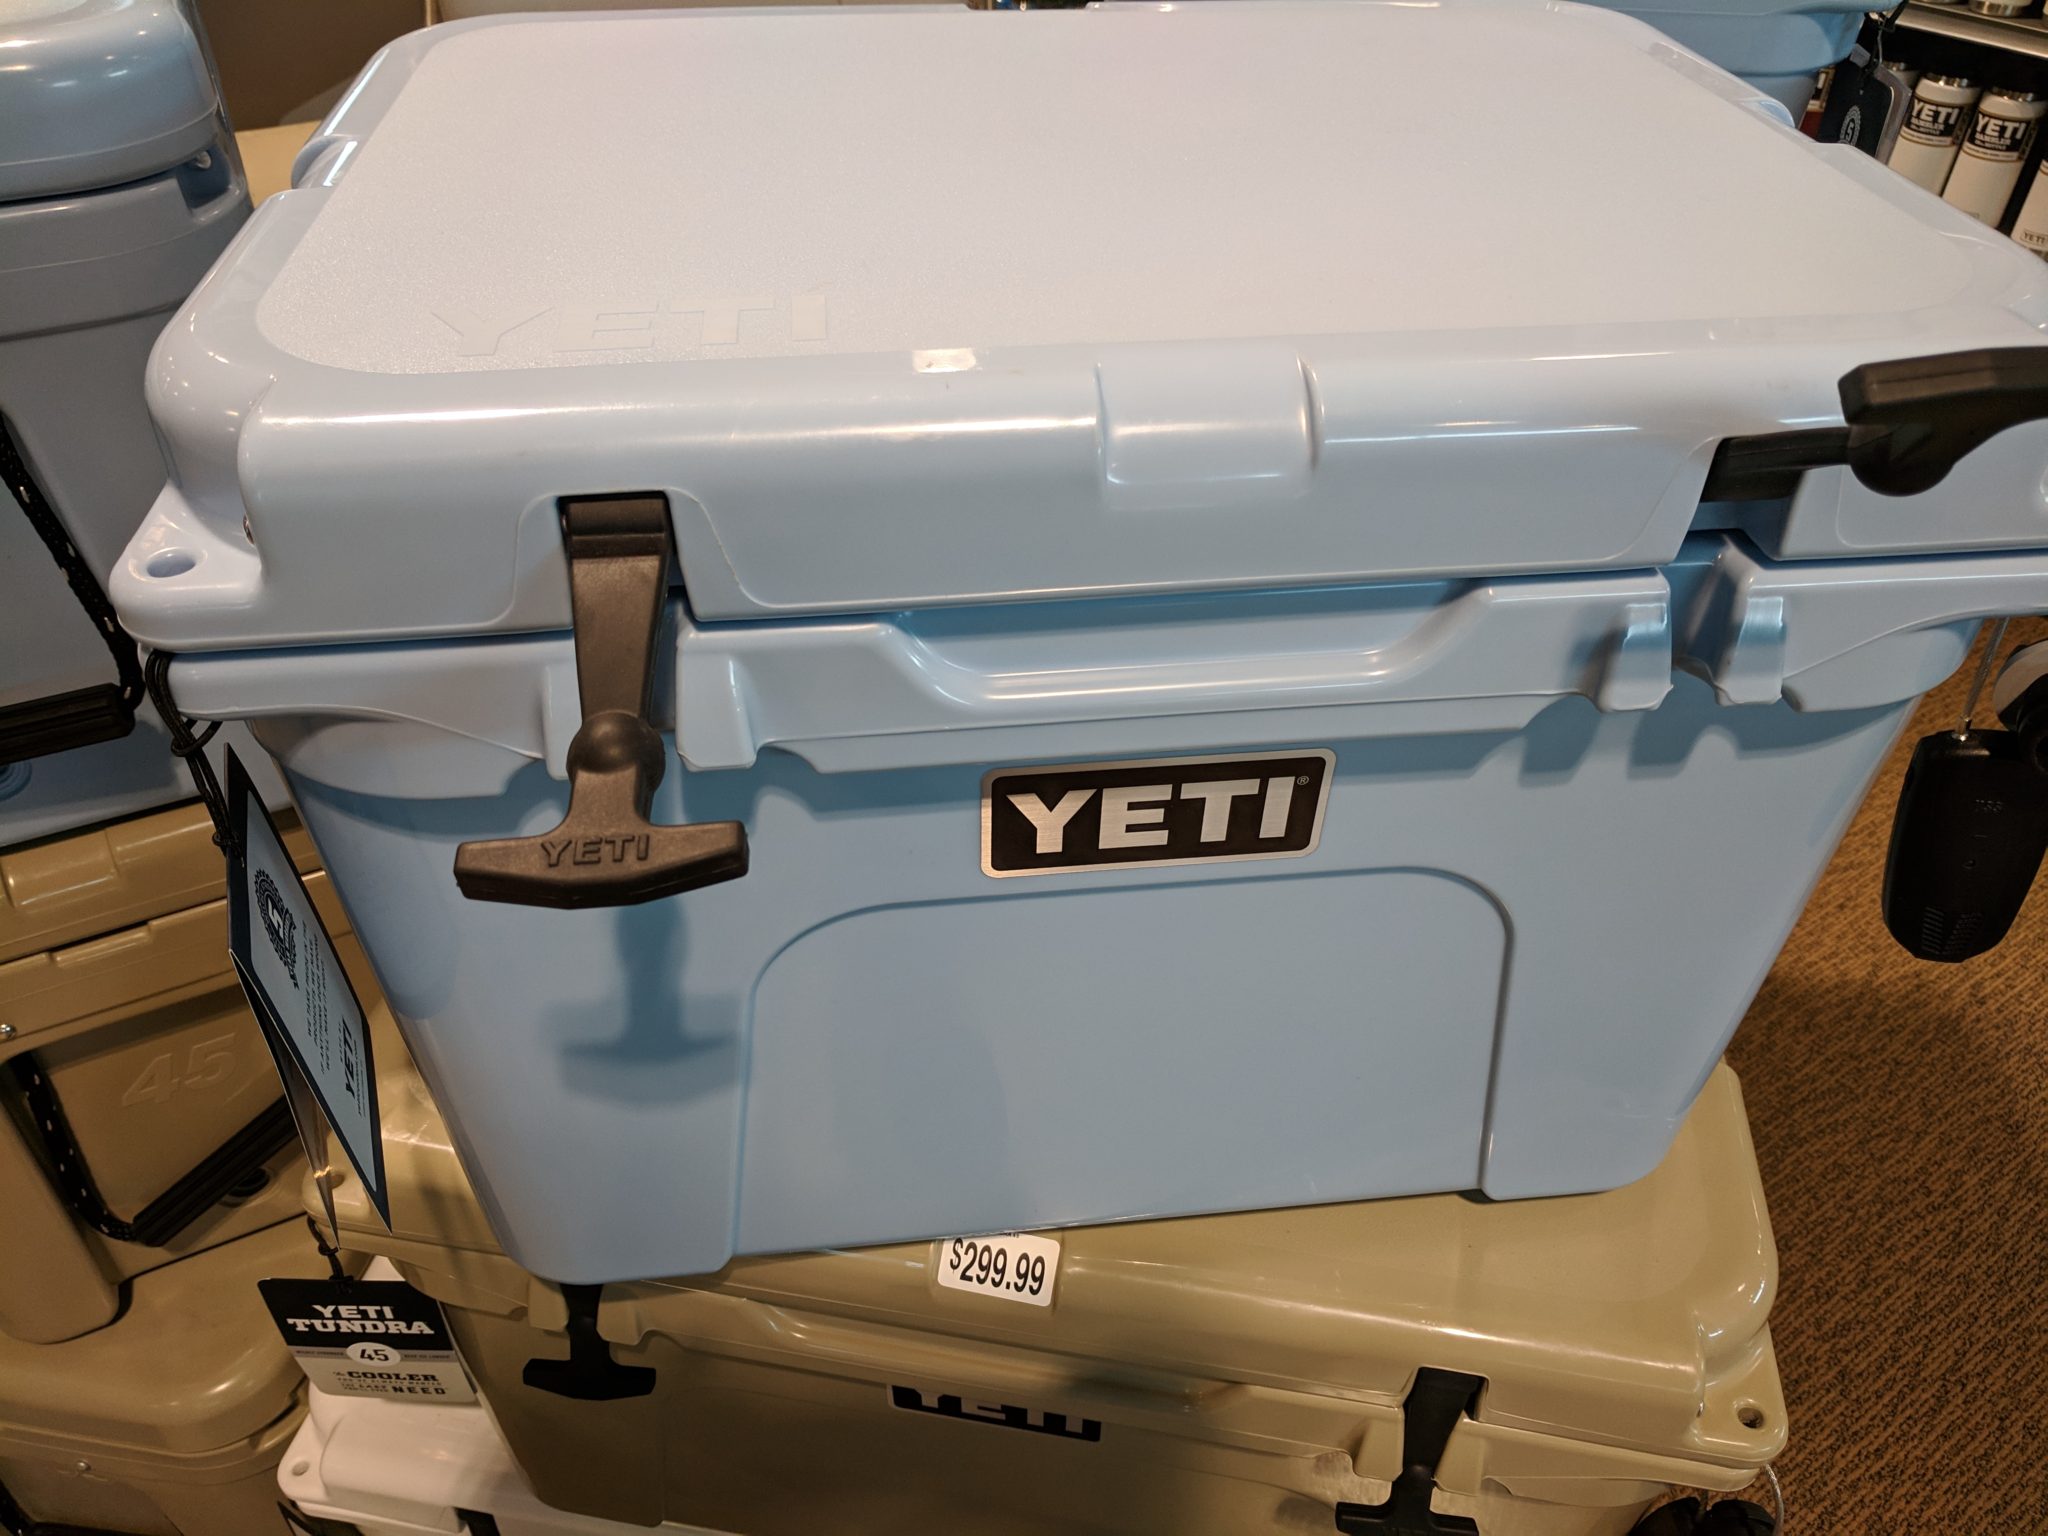 rtic cooler for sale near me